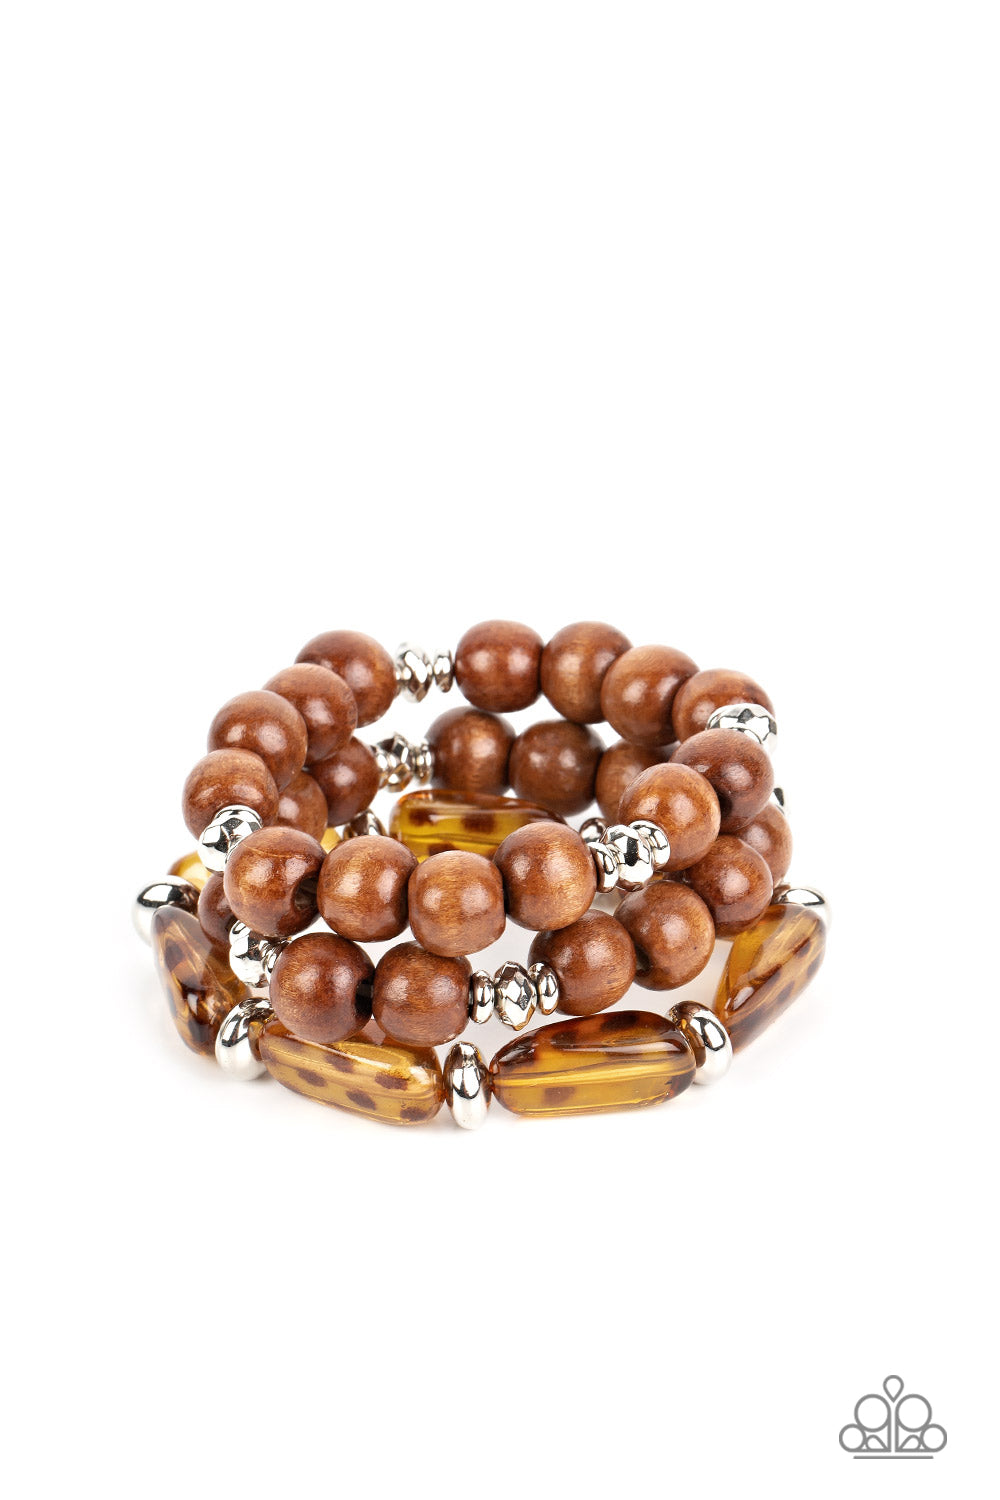 WILD-Mannered - Brown Cheetah Wood Bracelets - Paparazzi Accessories - Bejeweled Accessories By Kristie - Featuring hints of cheetah-like patterns, glassy acrylic beads join dainty silver accents and oversized wooden beads along stretchy bands that stack across the wrist in a wildly layered finish. Sold as one set of three bracelets.